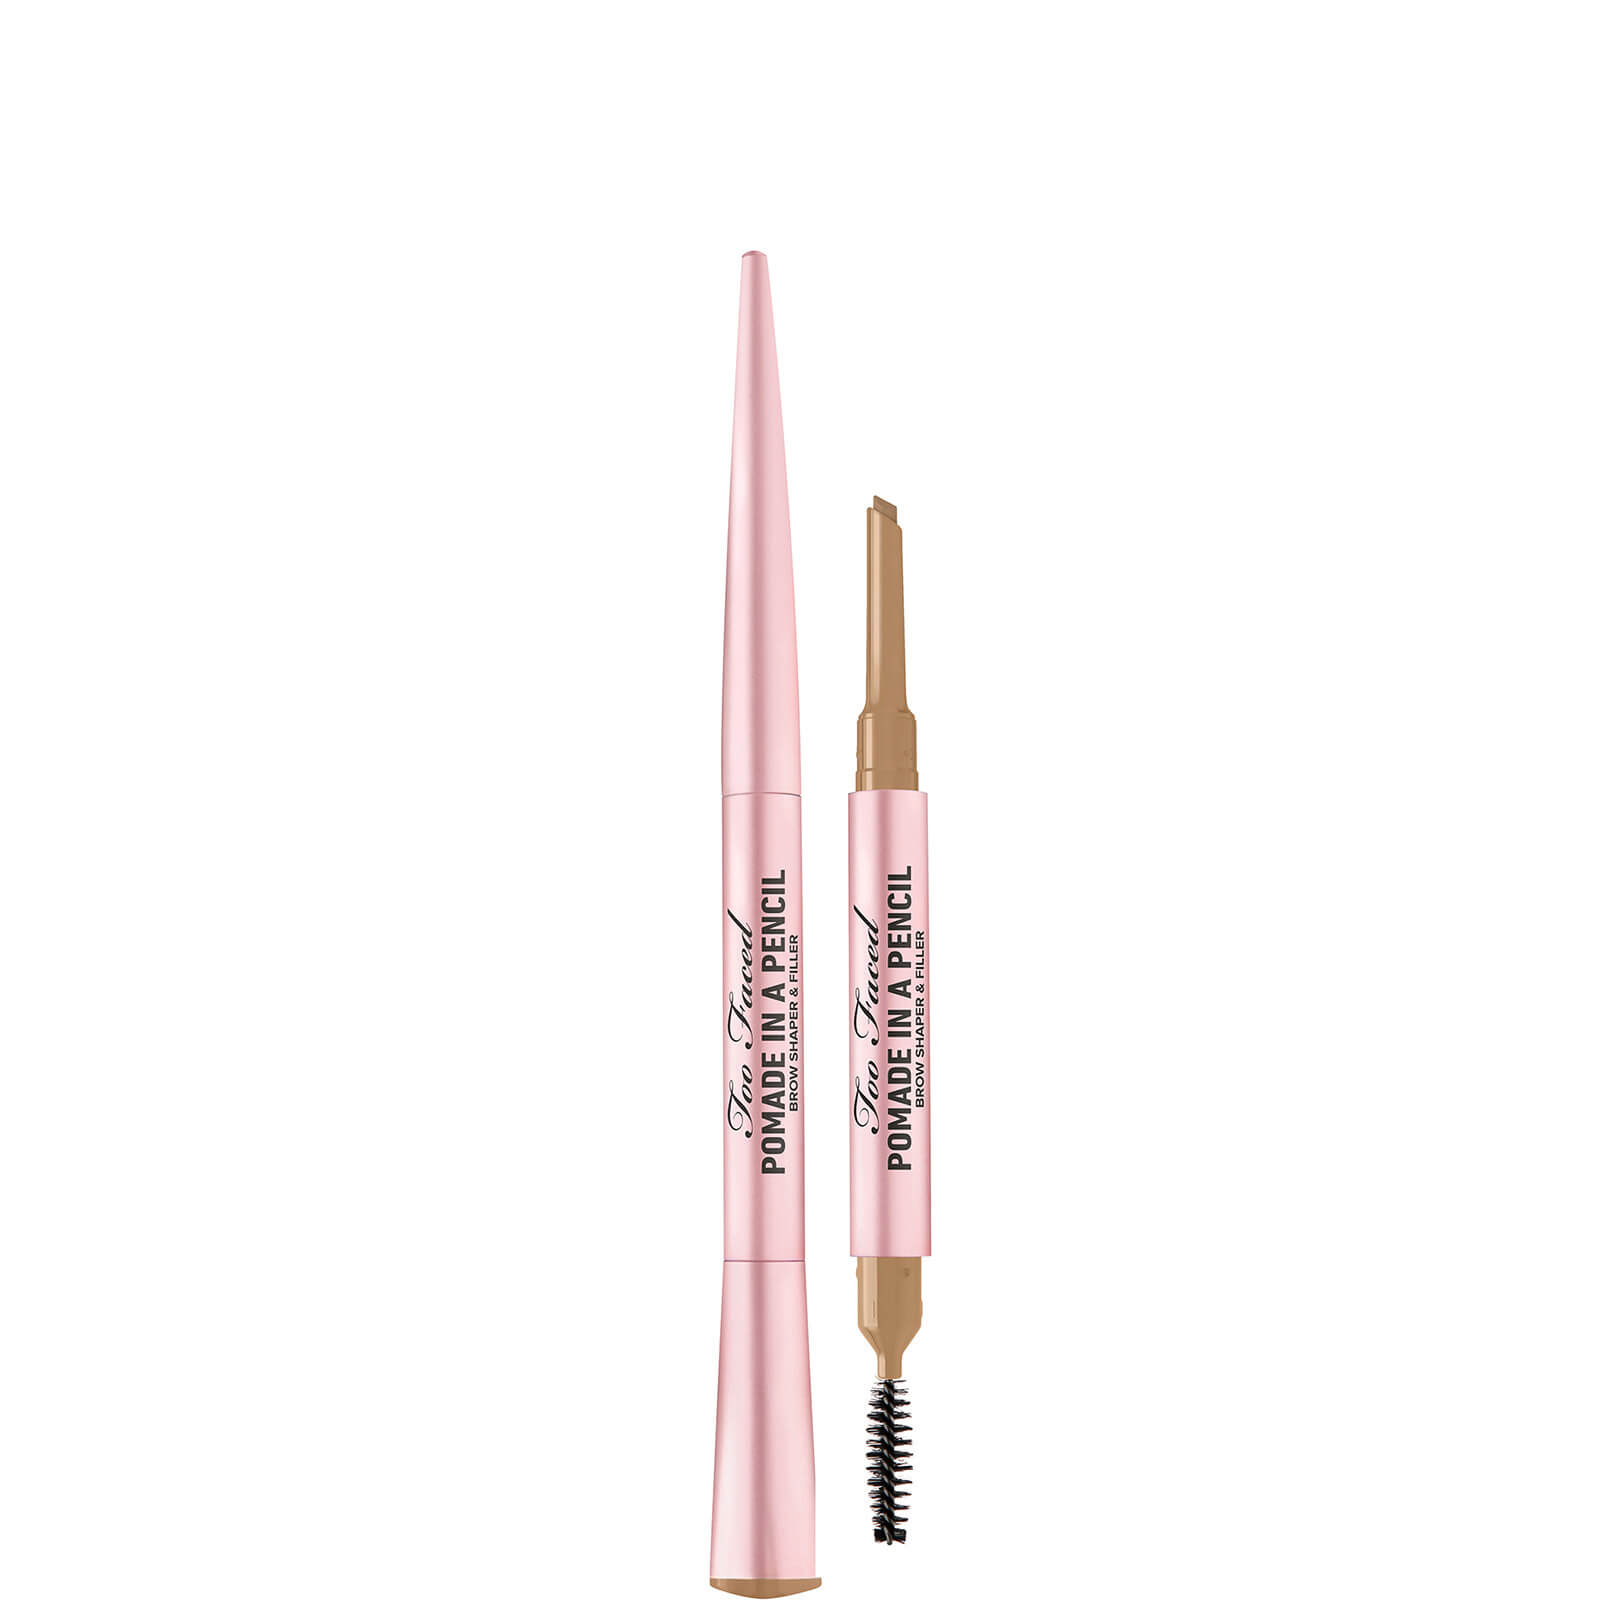 Brow Pomade in a Pencil Too Faced 0,19g (Various Shades) - Natural Blonde